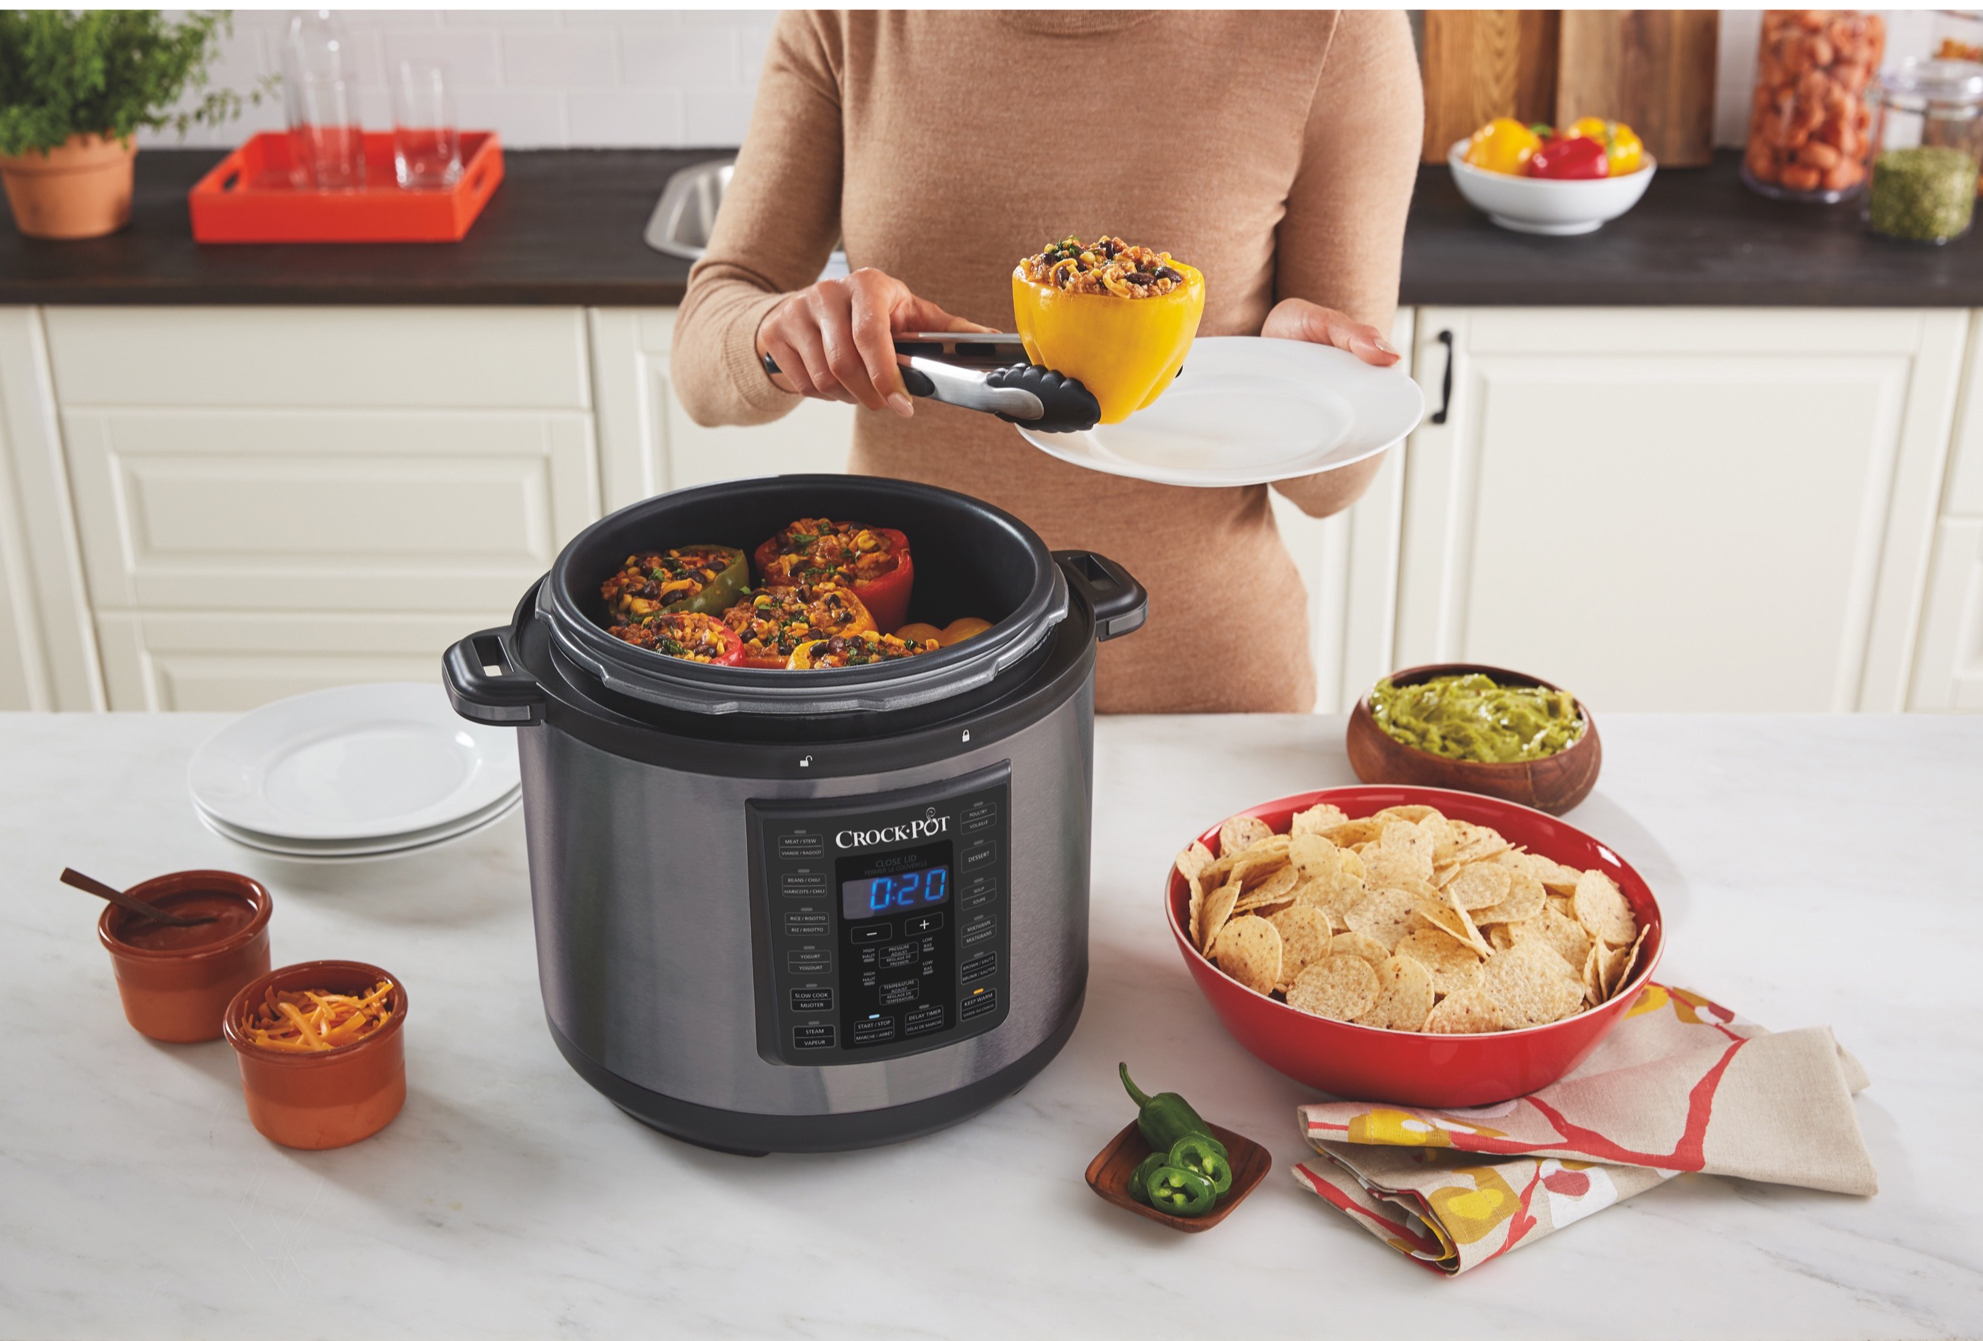 Crock-Pot 6 Qt 8-in-1 Multi-Use Express Crock Programmable Pressure Cooker, Slow Cooker, Sauté, and Steamer, Black Stainless Steel - image 4 of 10